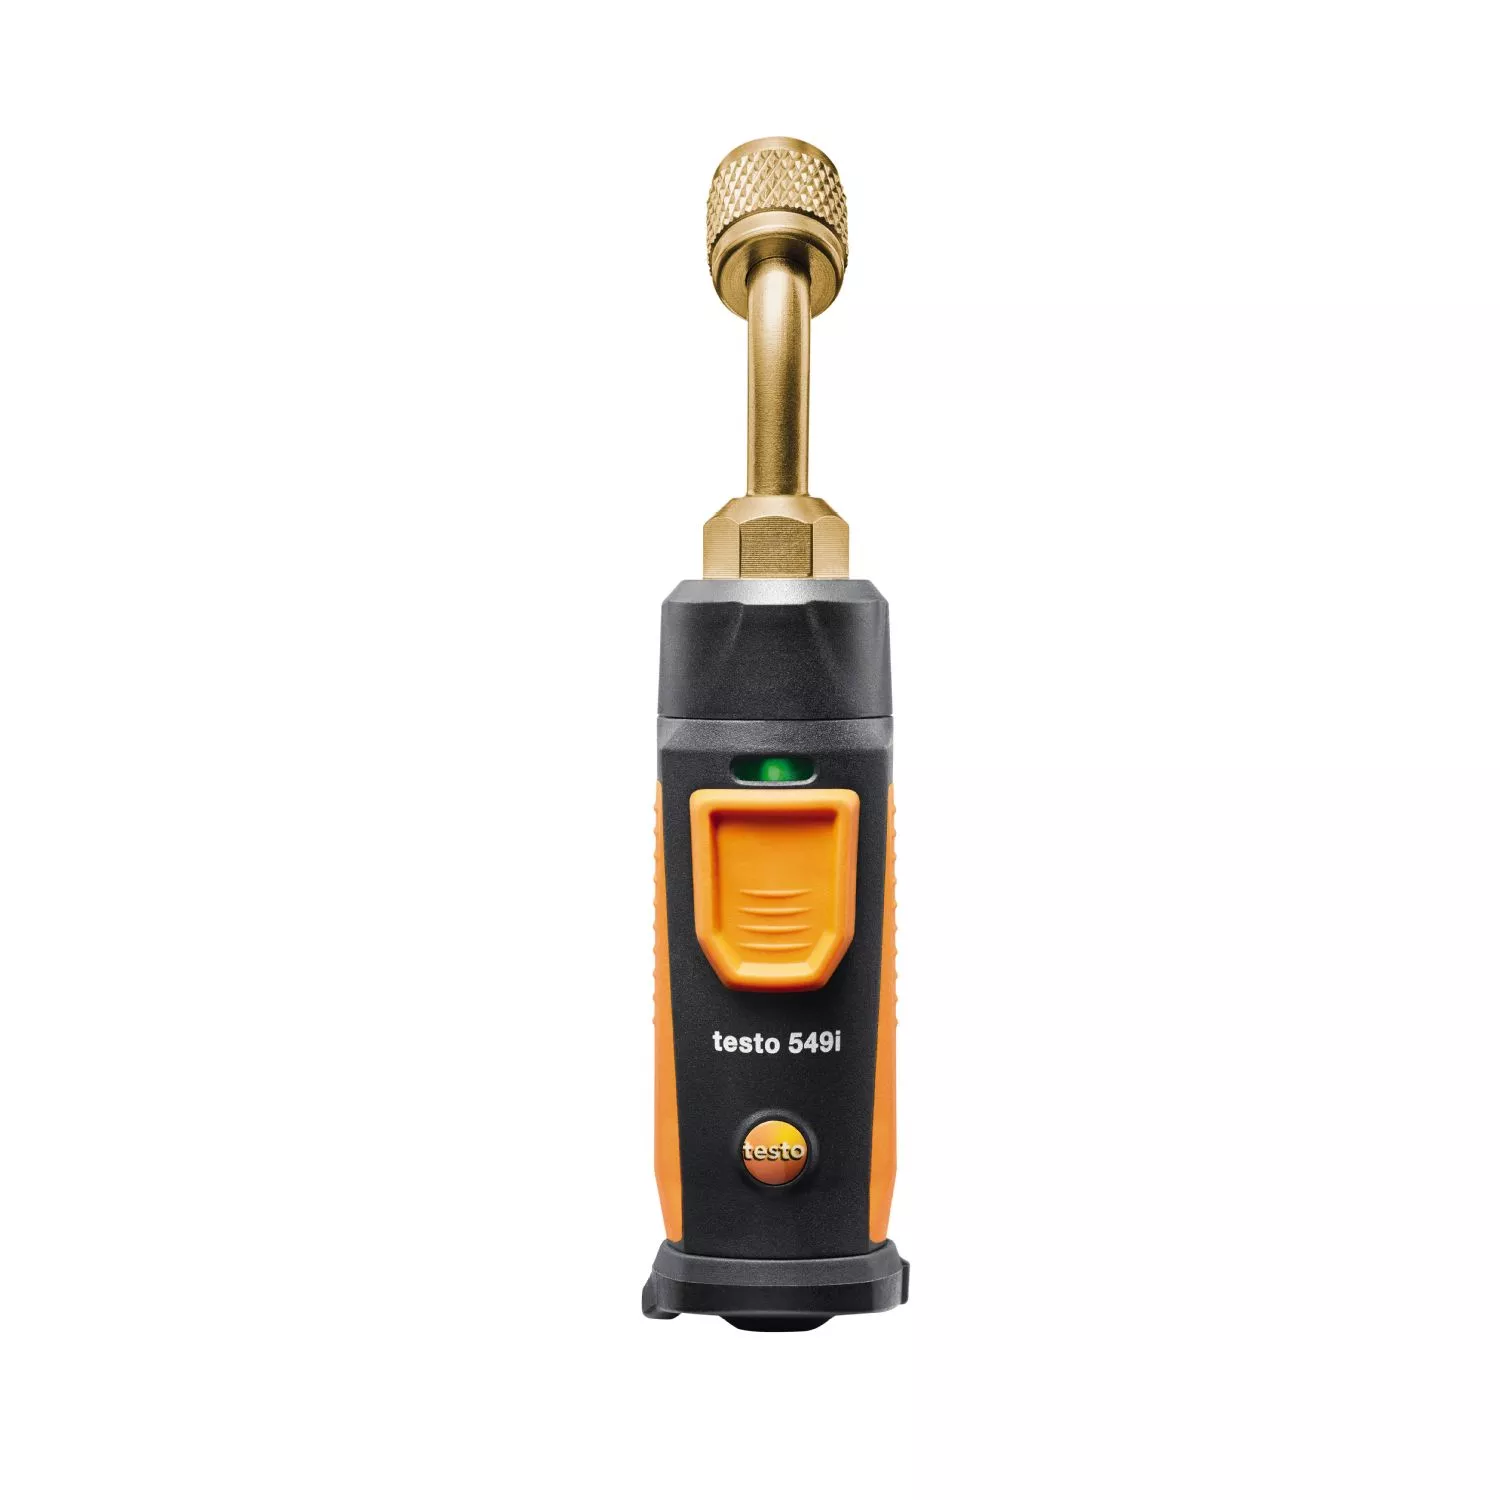 In Stock Testo 549i - High-pressure gauge operated via smartphone Order-Nr.  0560 2549 02  New & Original with Good Price